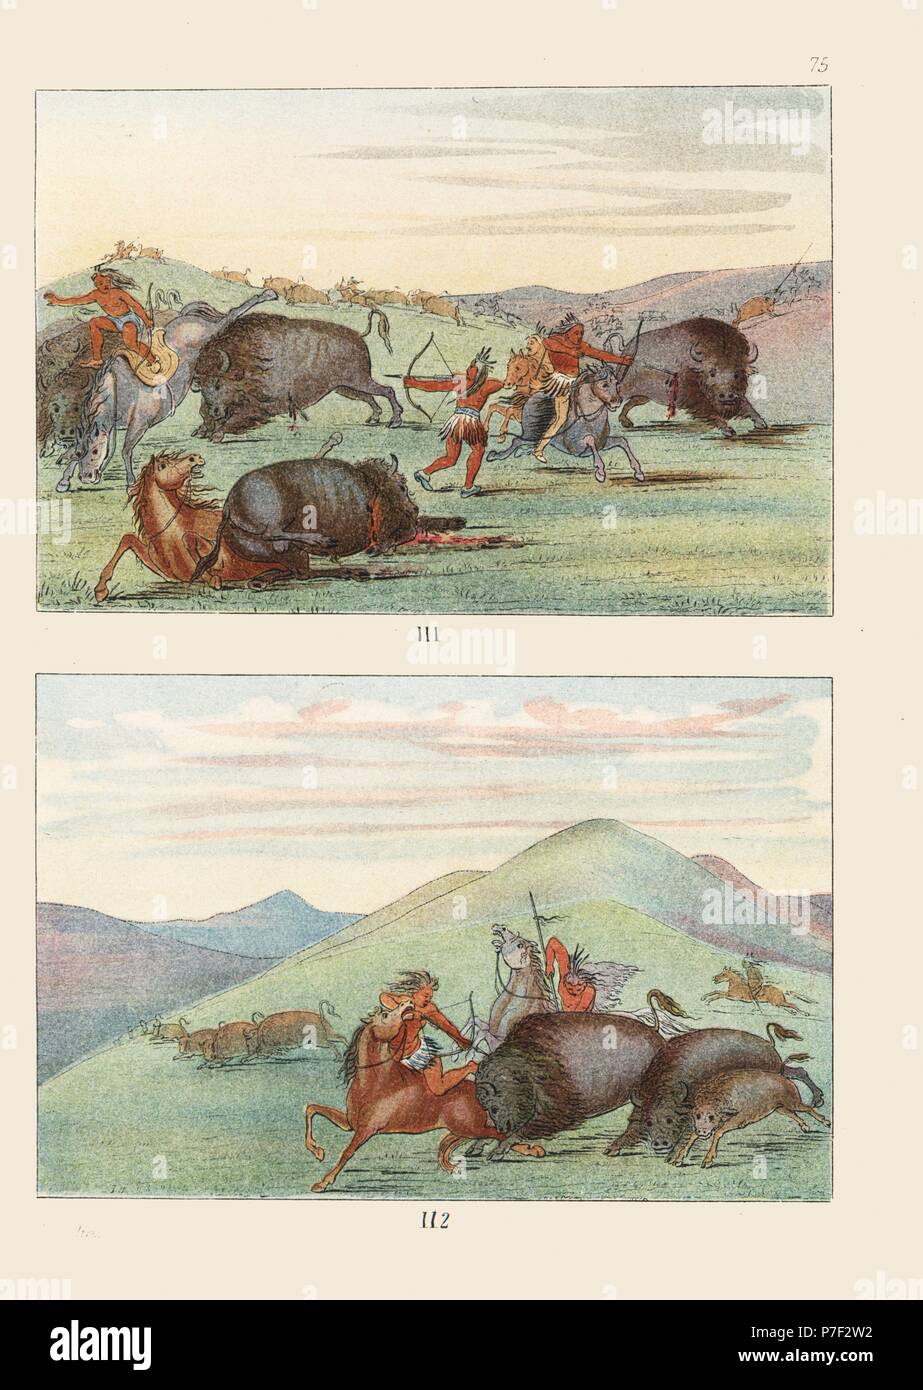 Native American hunters attacked by bulls defending young during a buffalo hunt. Handcoloured lithograph from George Manners, Customs and Condition of the North American Indians, London, 1841 Stock Photo - Alamy